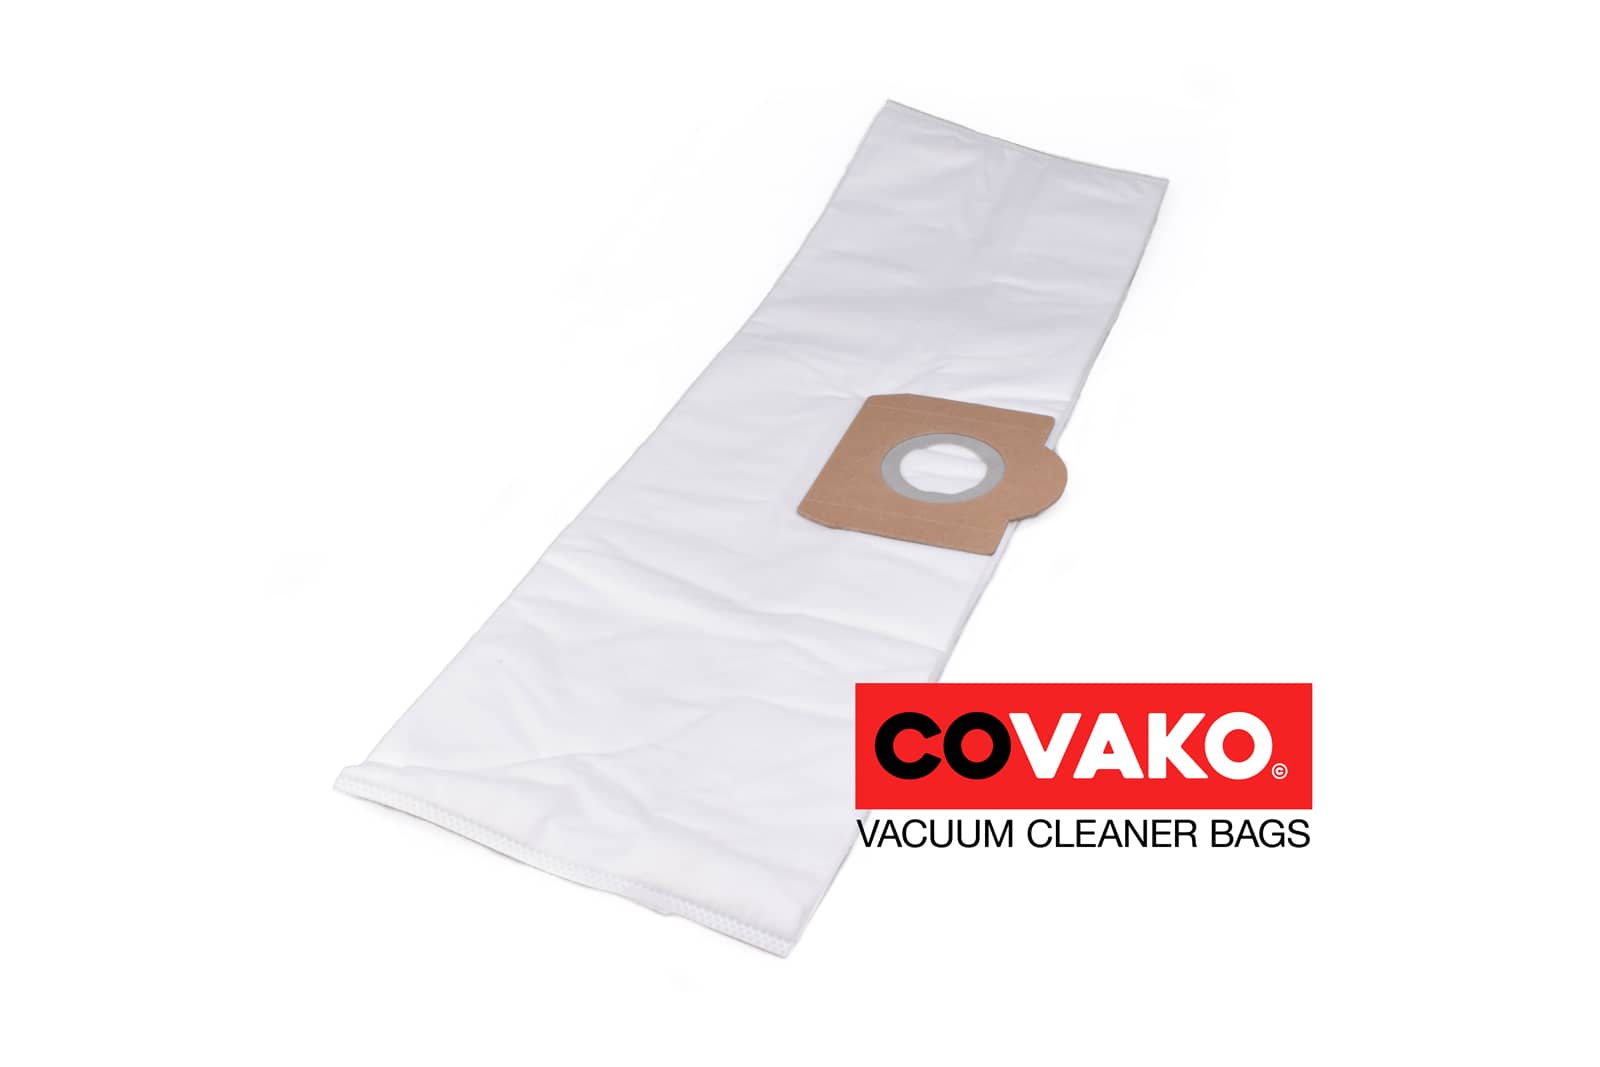 Bosch PAS 12-27 / Synthesis - Bosch vacuum cleaner bags